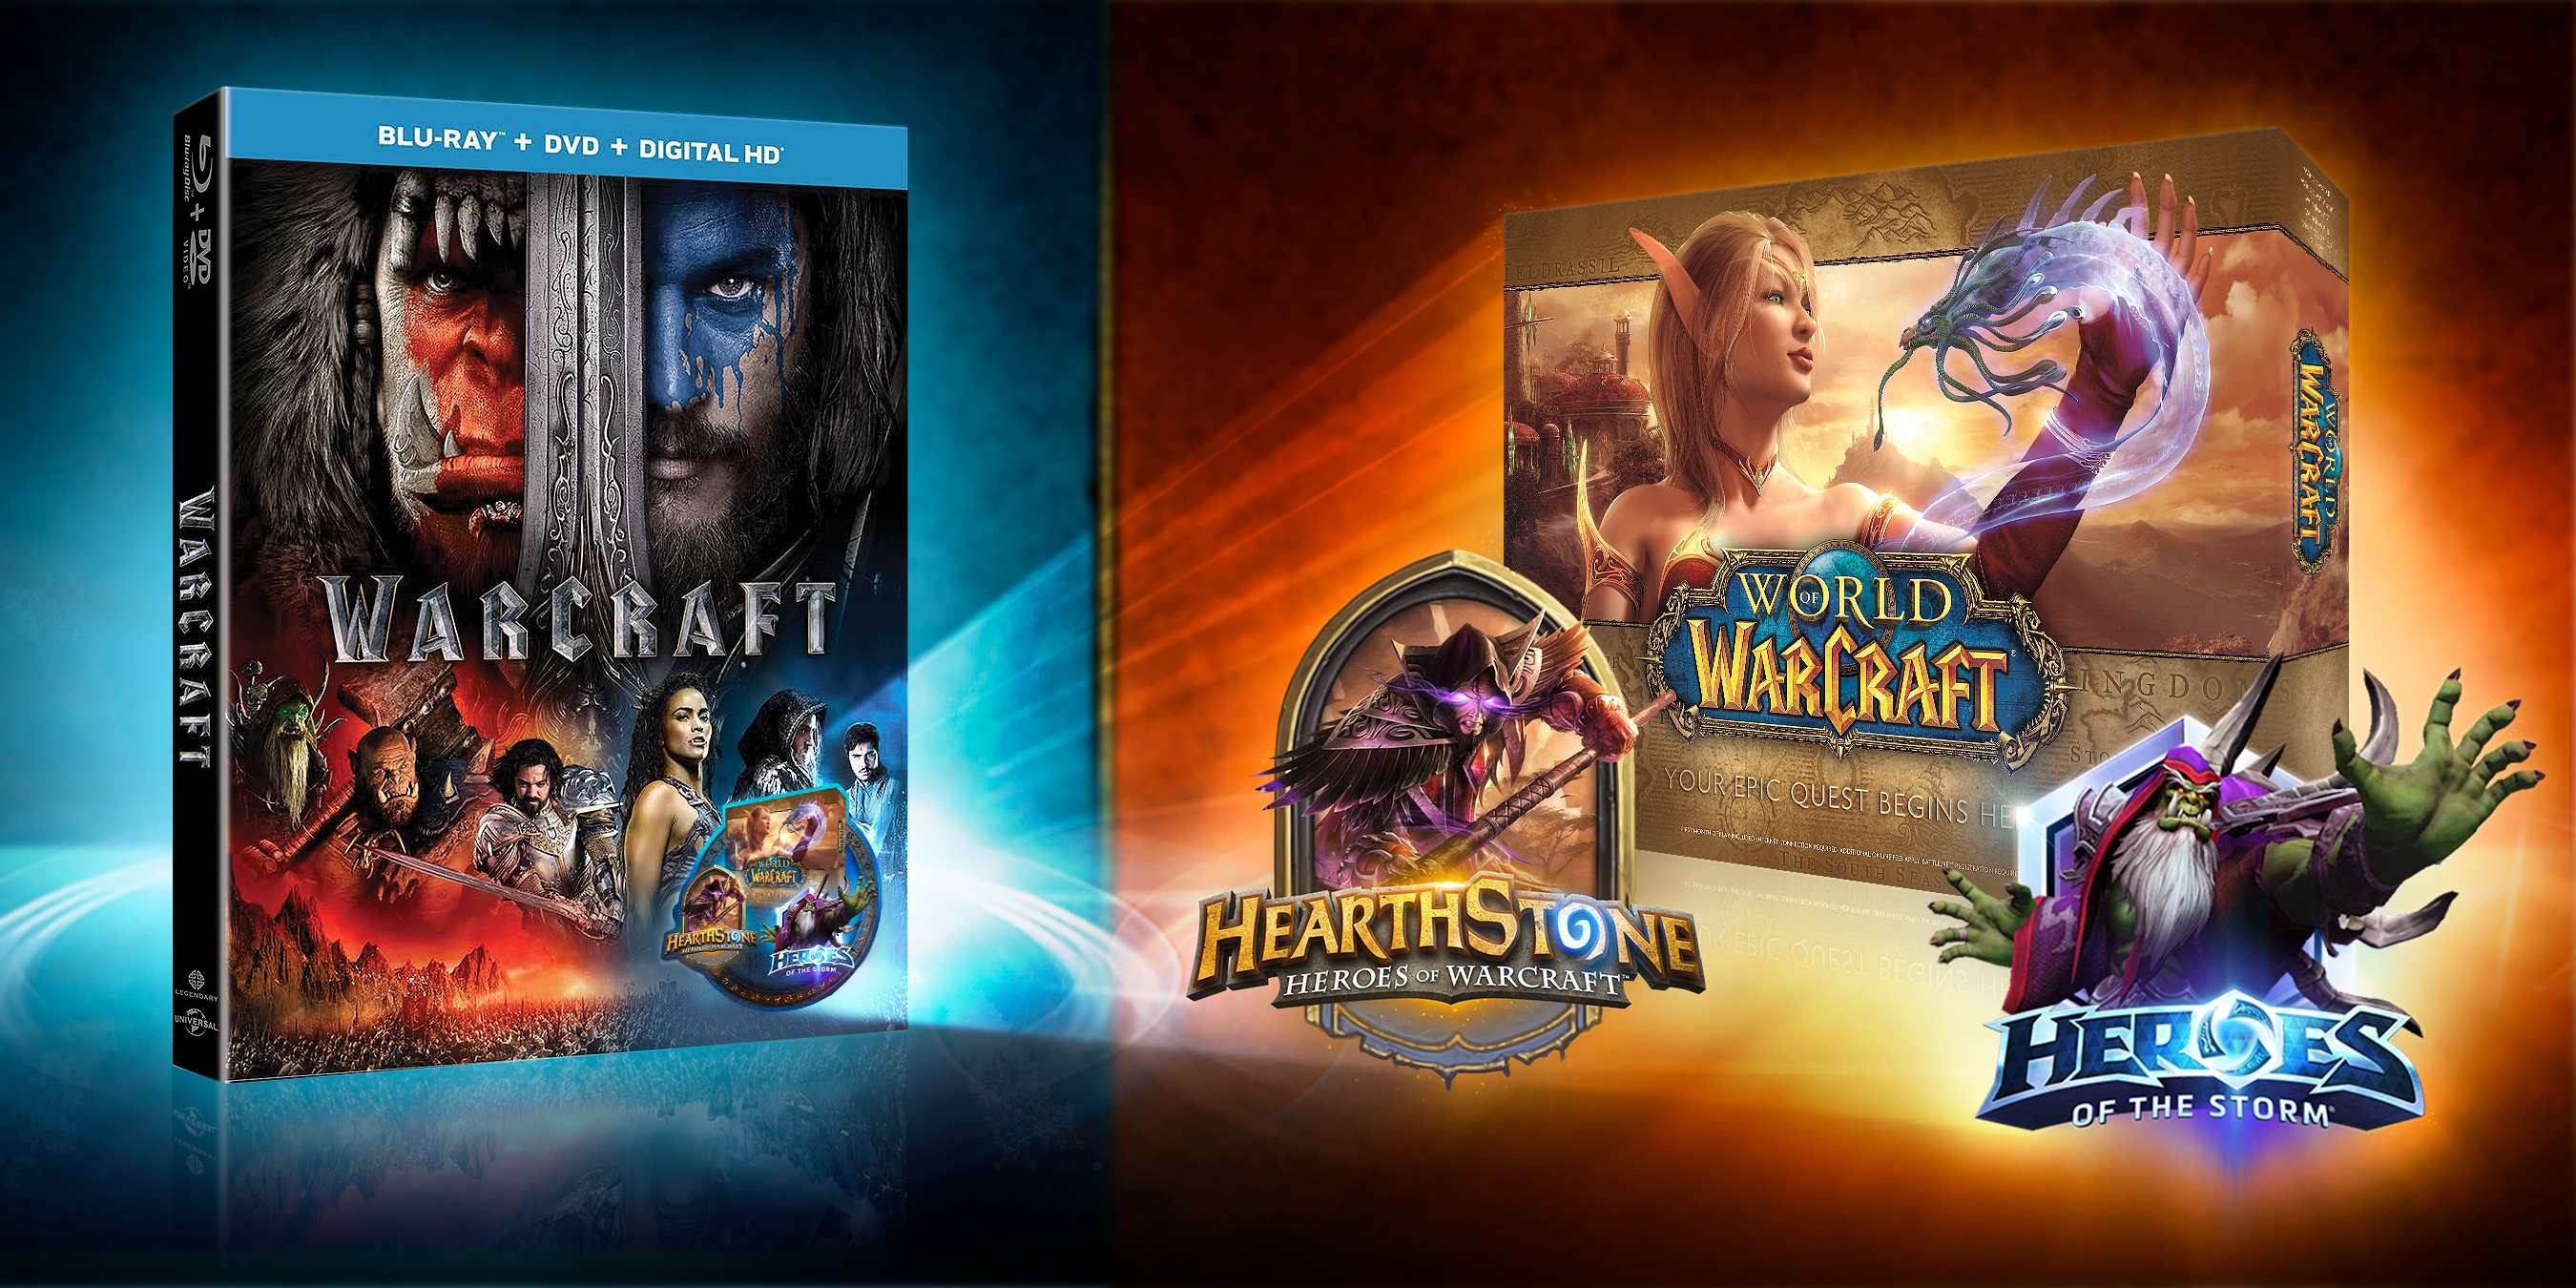 Buy WARCRAFT™ on Blu-Ray and DVD, Get Three Epic Digital Loot